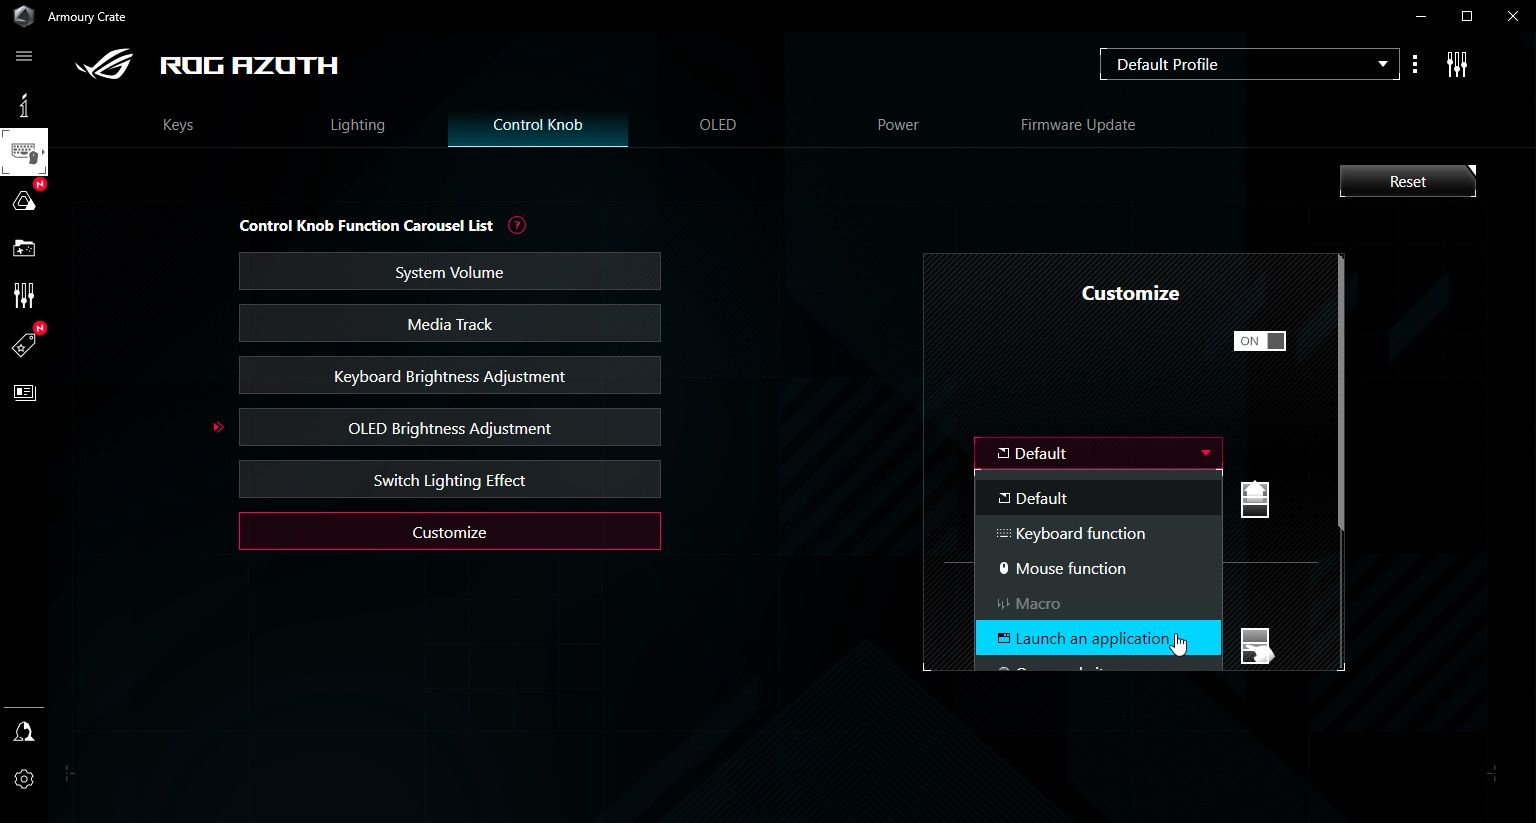 asus rog azoth armoury crate software options